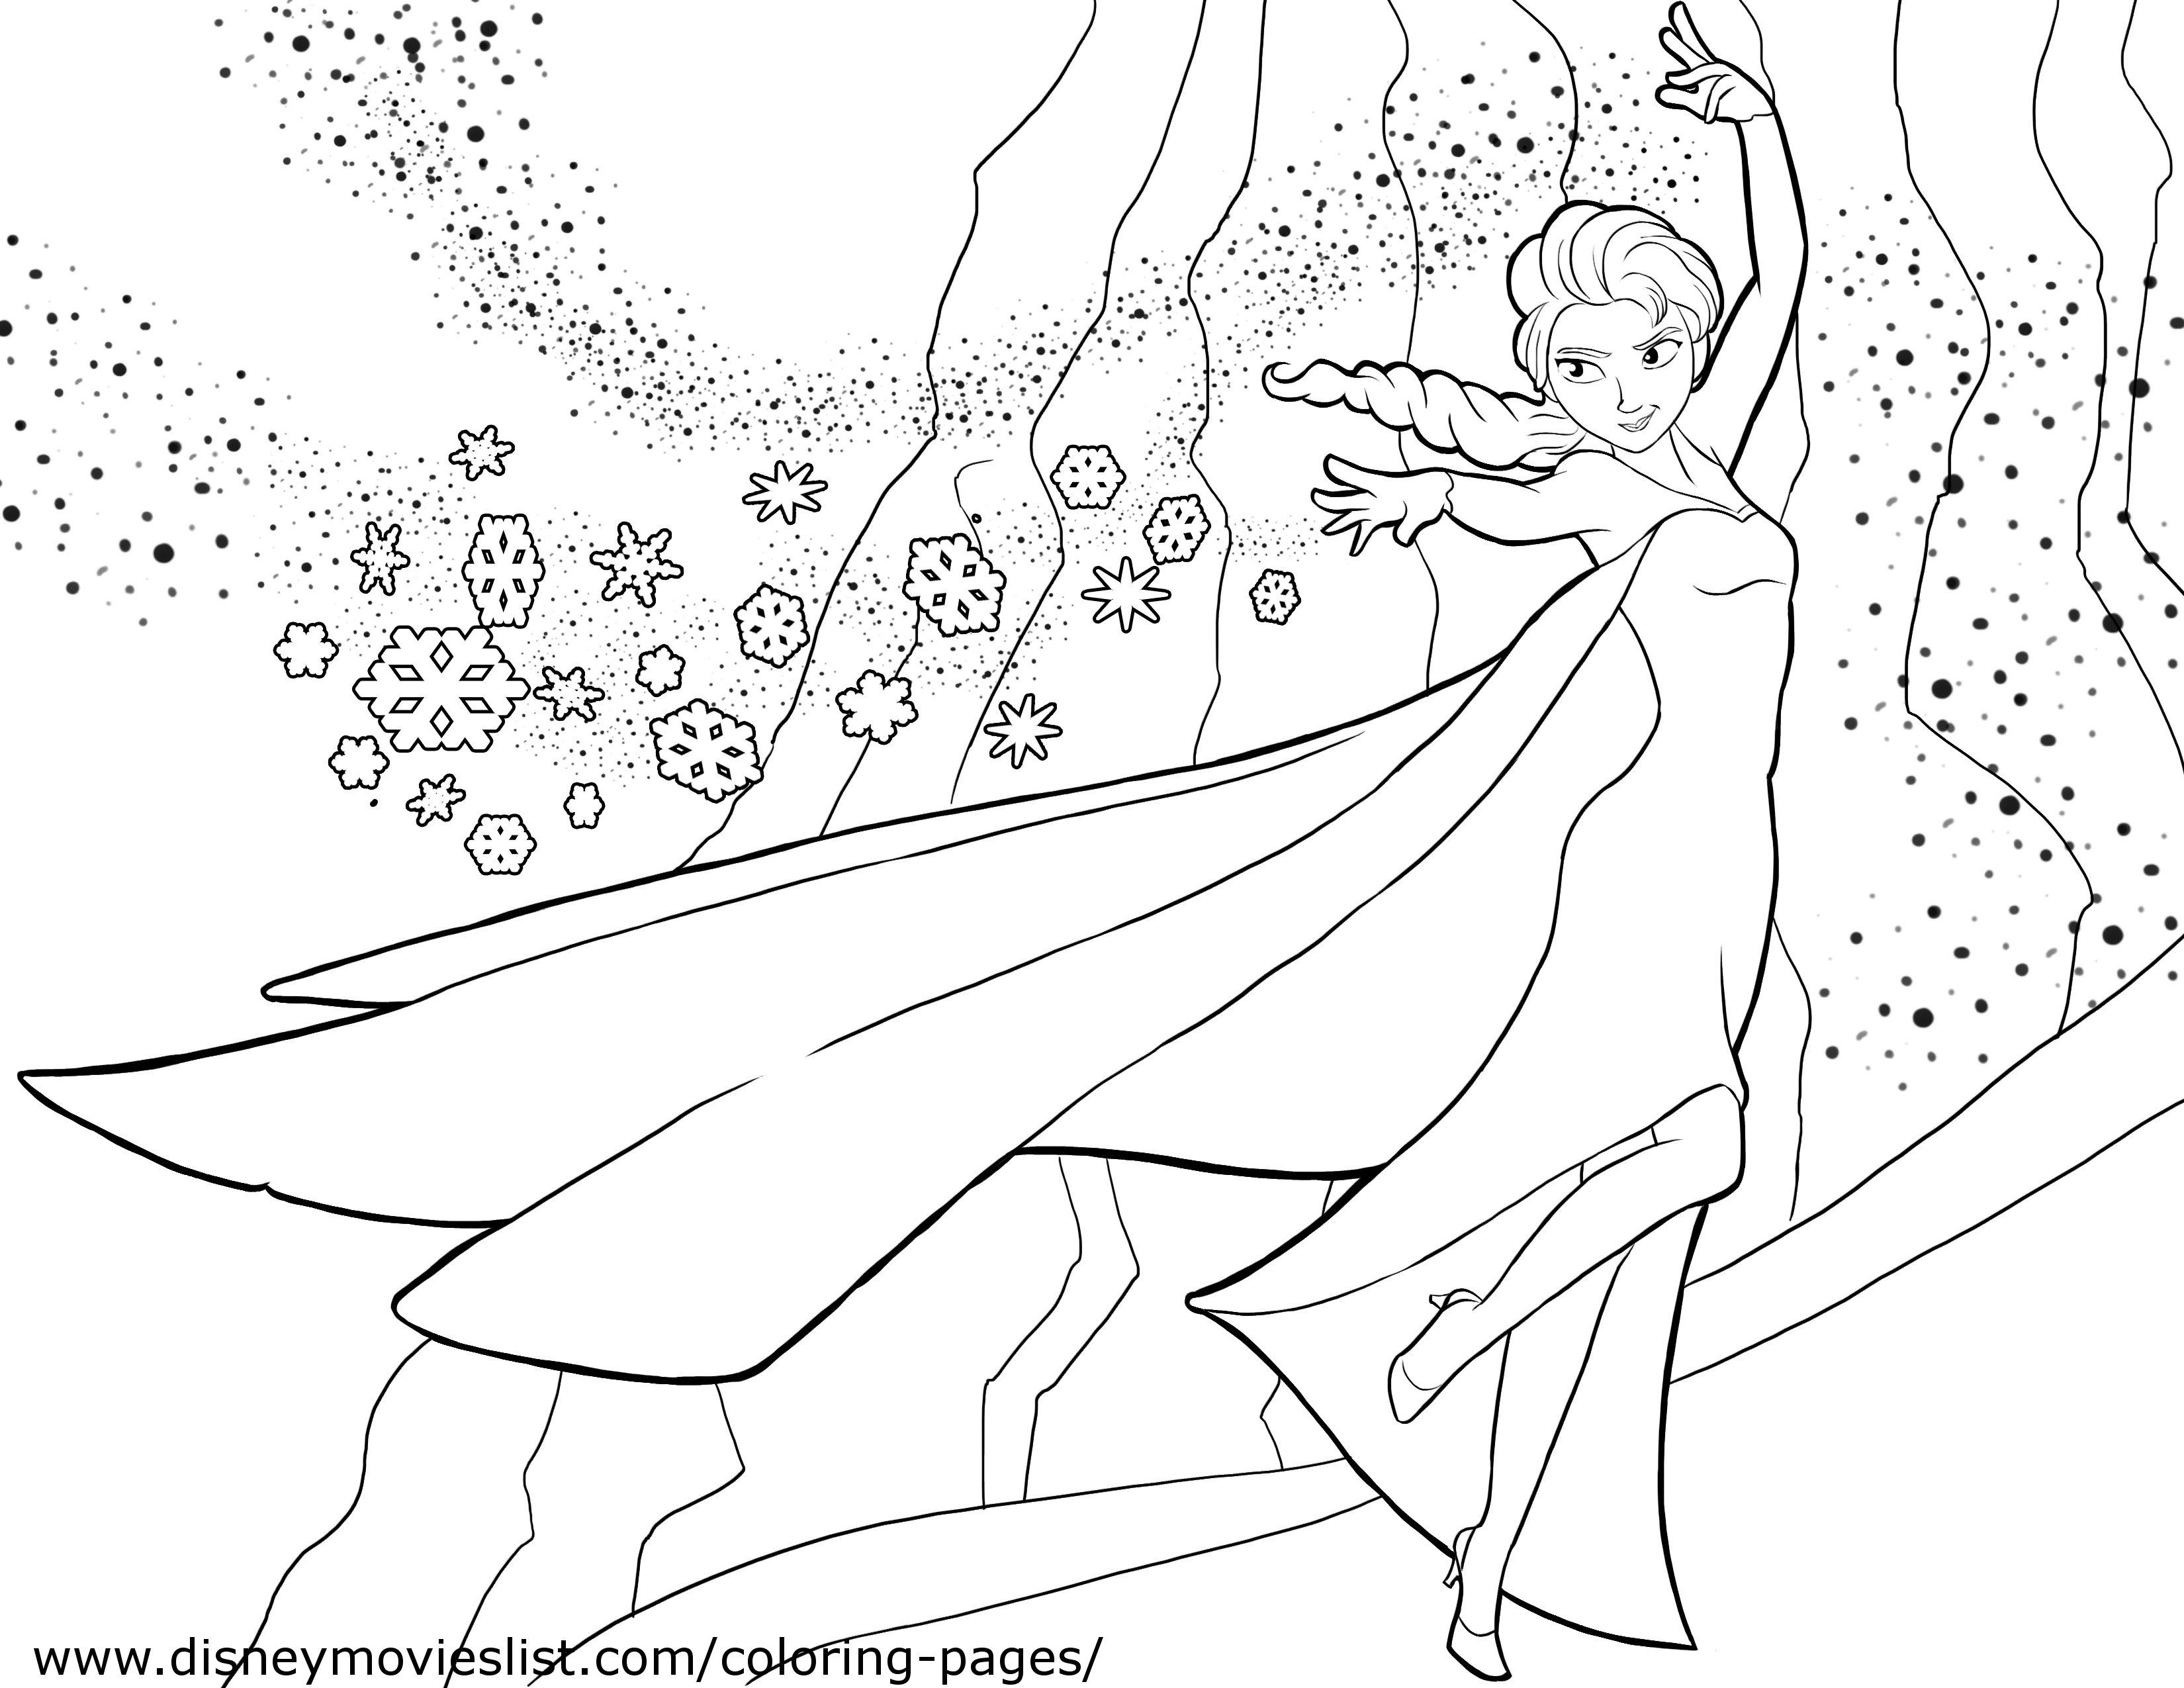 Disney&amp;#039;s Frozen Coloring Pages, Free Disney Printable Frozen Color - Free Printable Frozen Coloring Pages